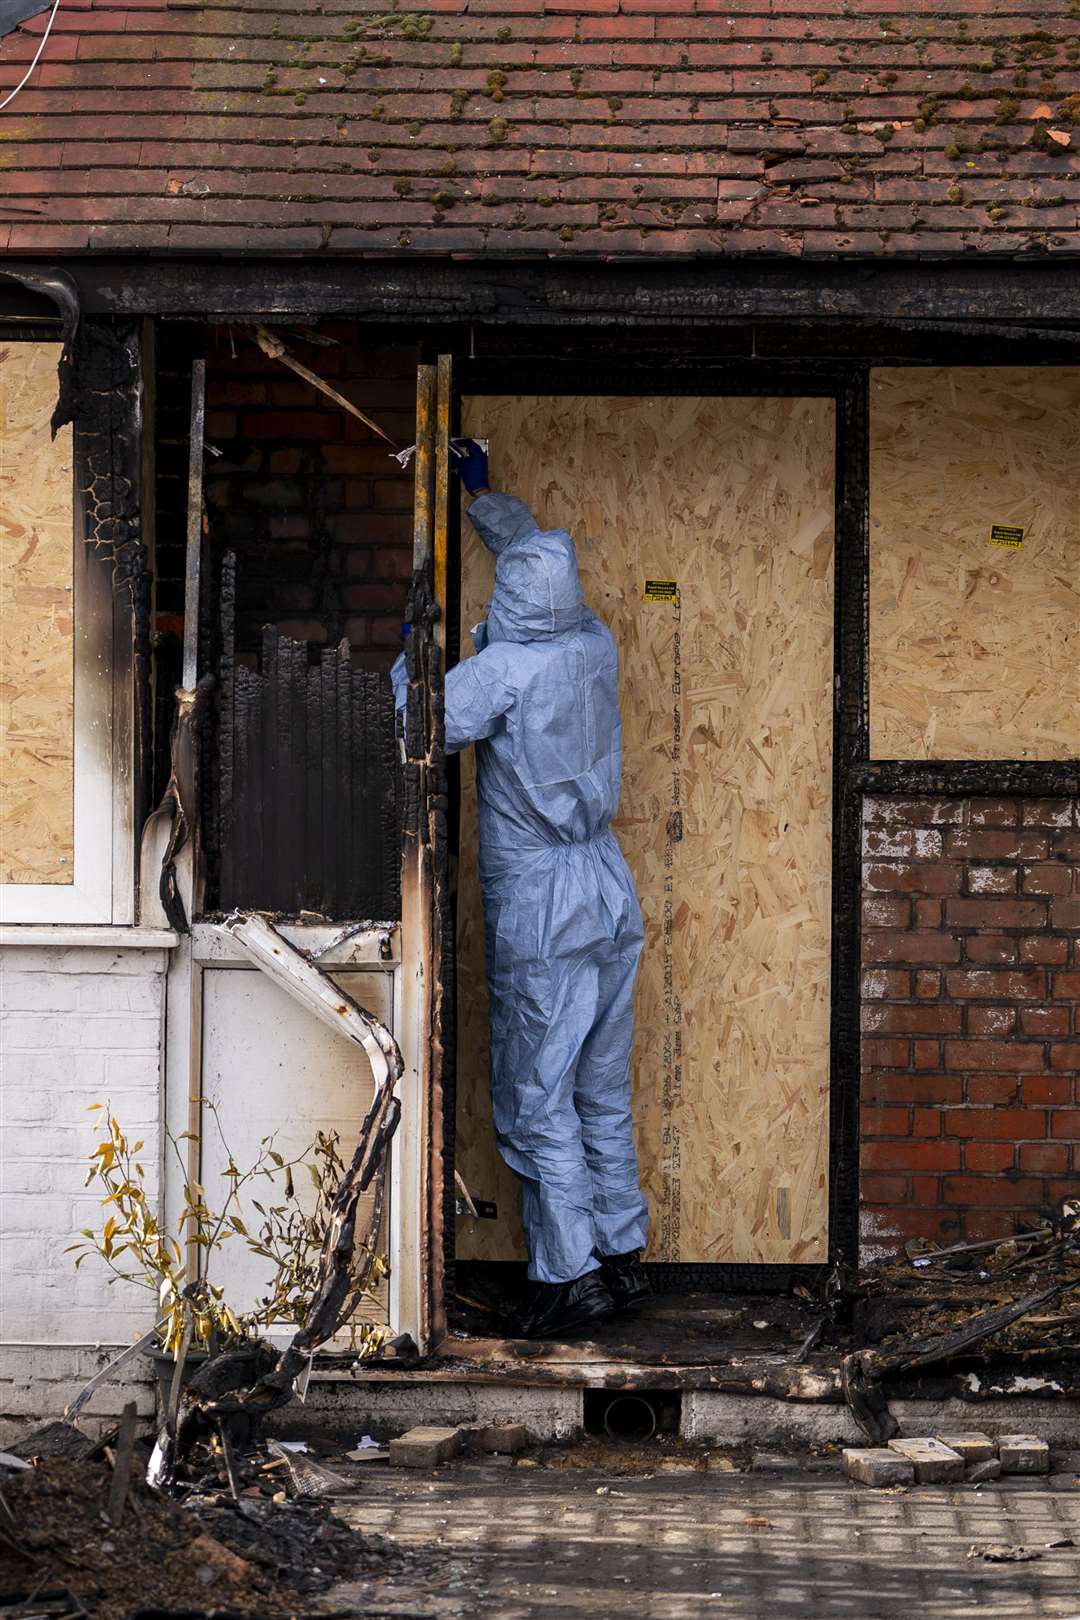 A forensic officer carries out investigations at the scene of a fatal house fire in Streatham (Jordan Pettitt/PA)